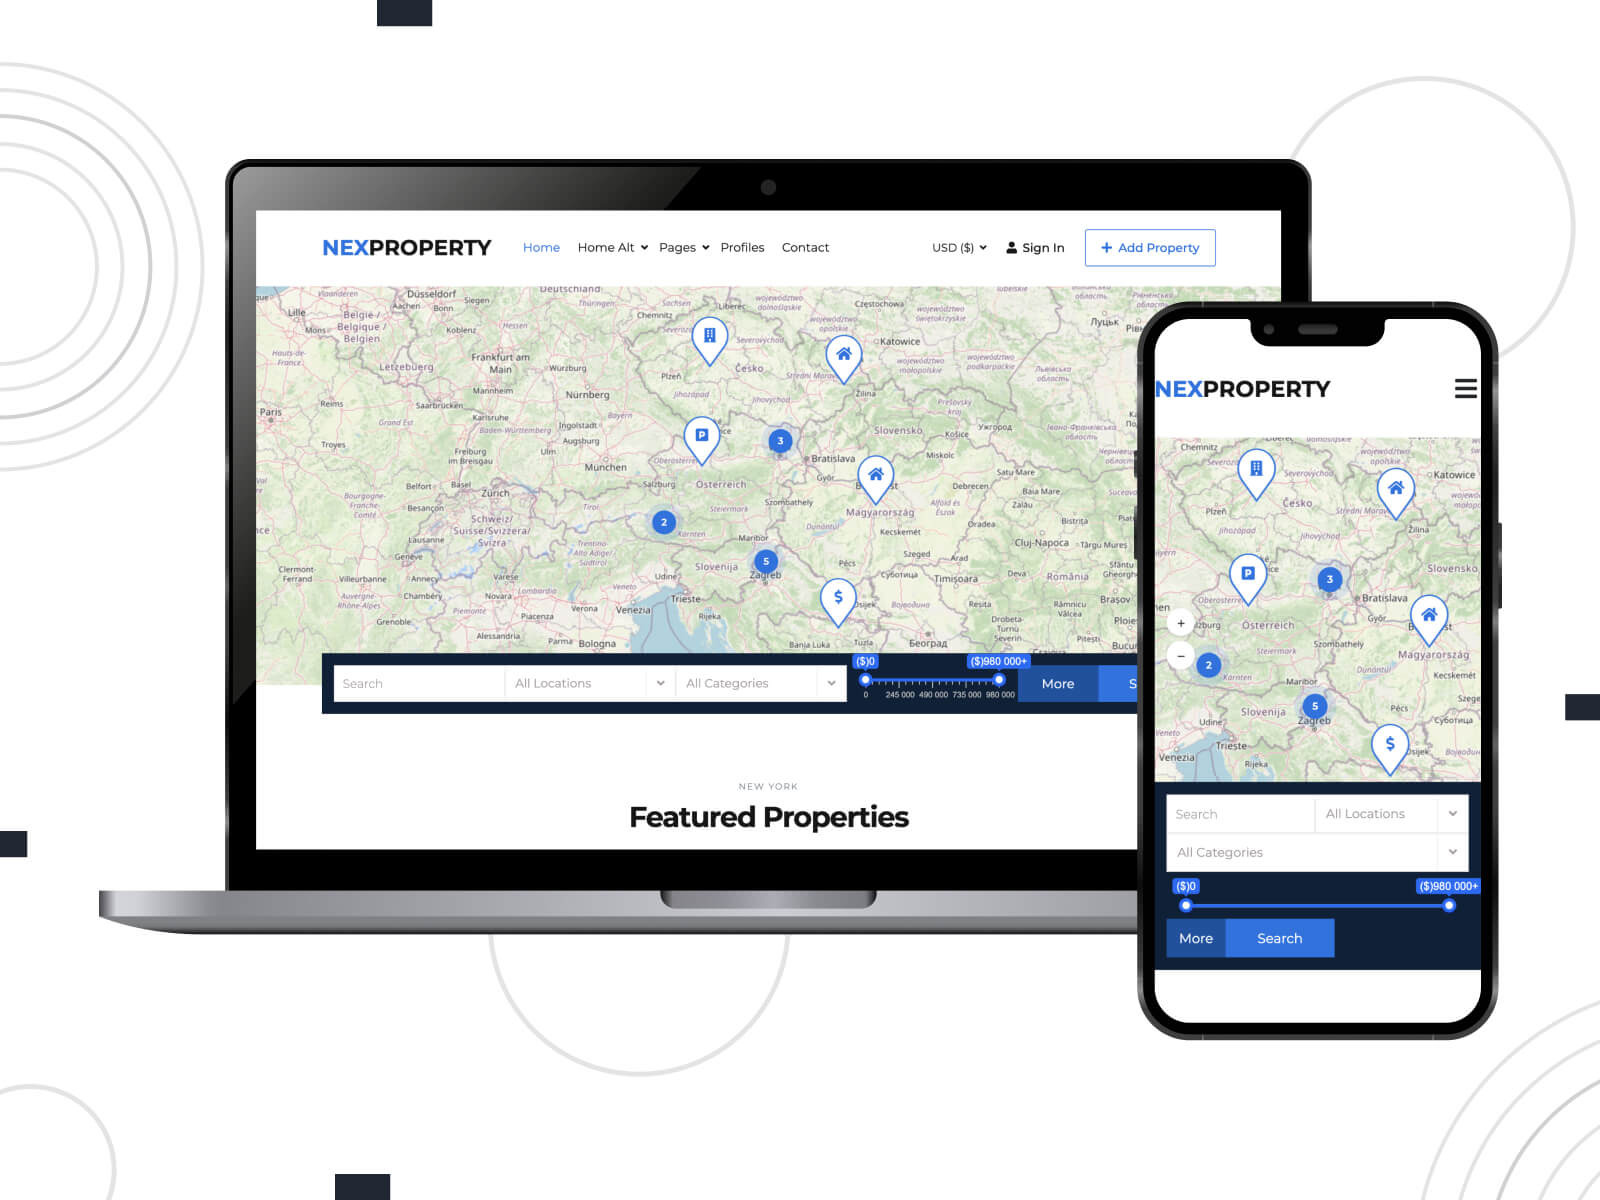 Illustration of NexProperty - light, warm, flexible WordPress directory theme for business listings in dim gray, corn flowerblue, and royal blue color combination.